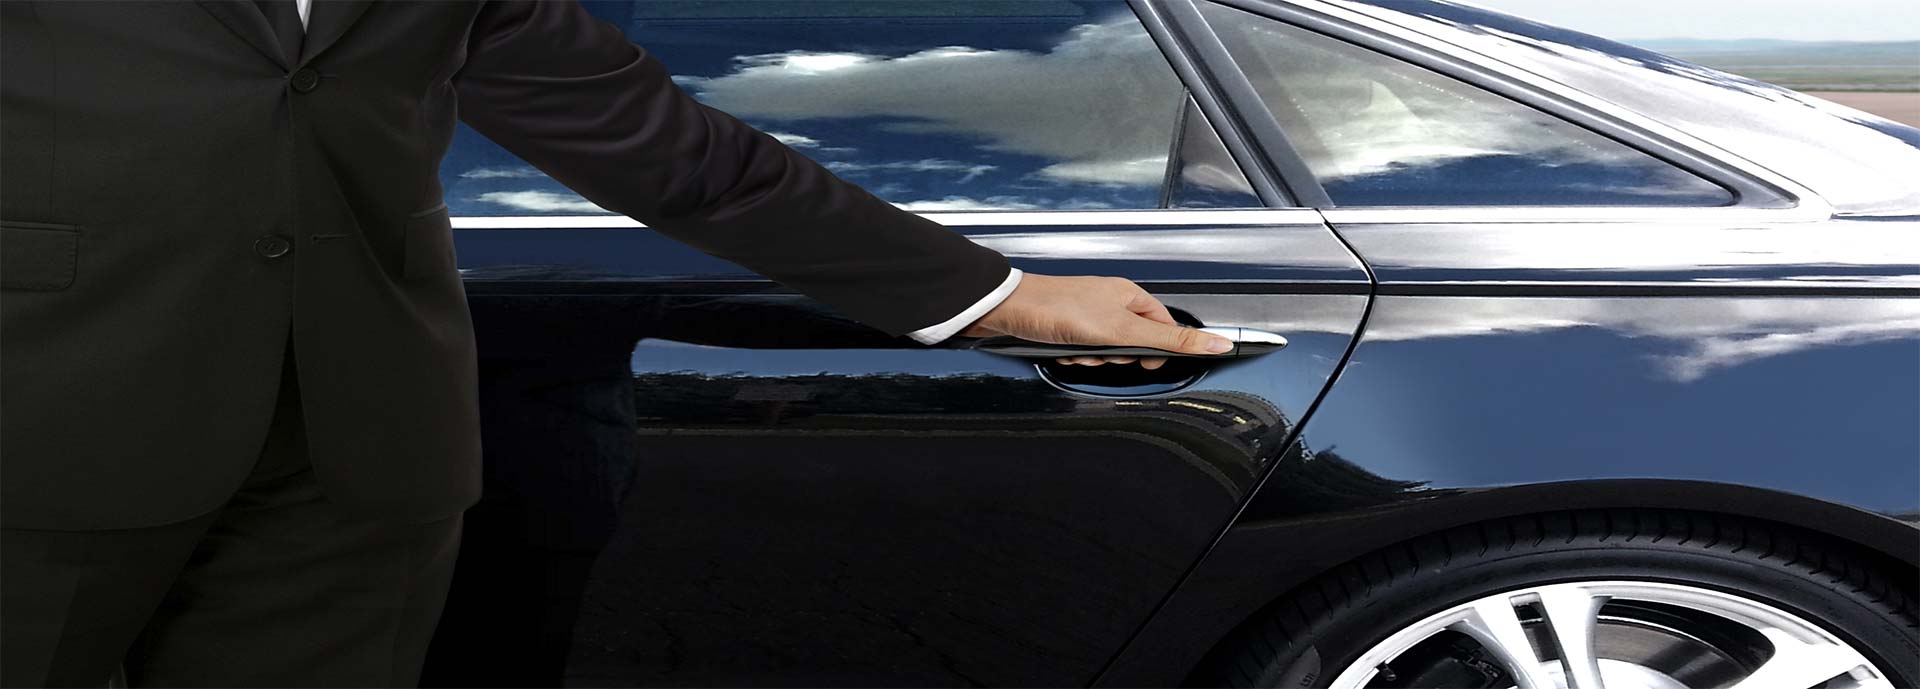 Executive Chauffeur services in Chicago